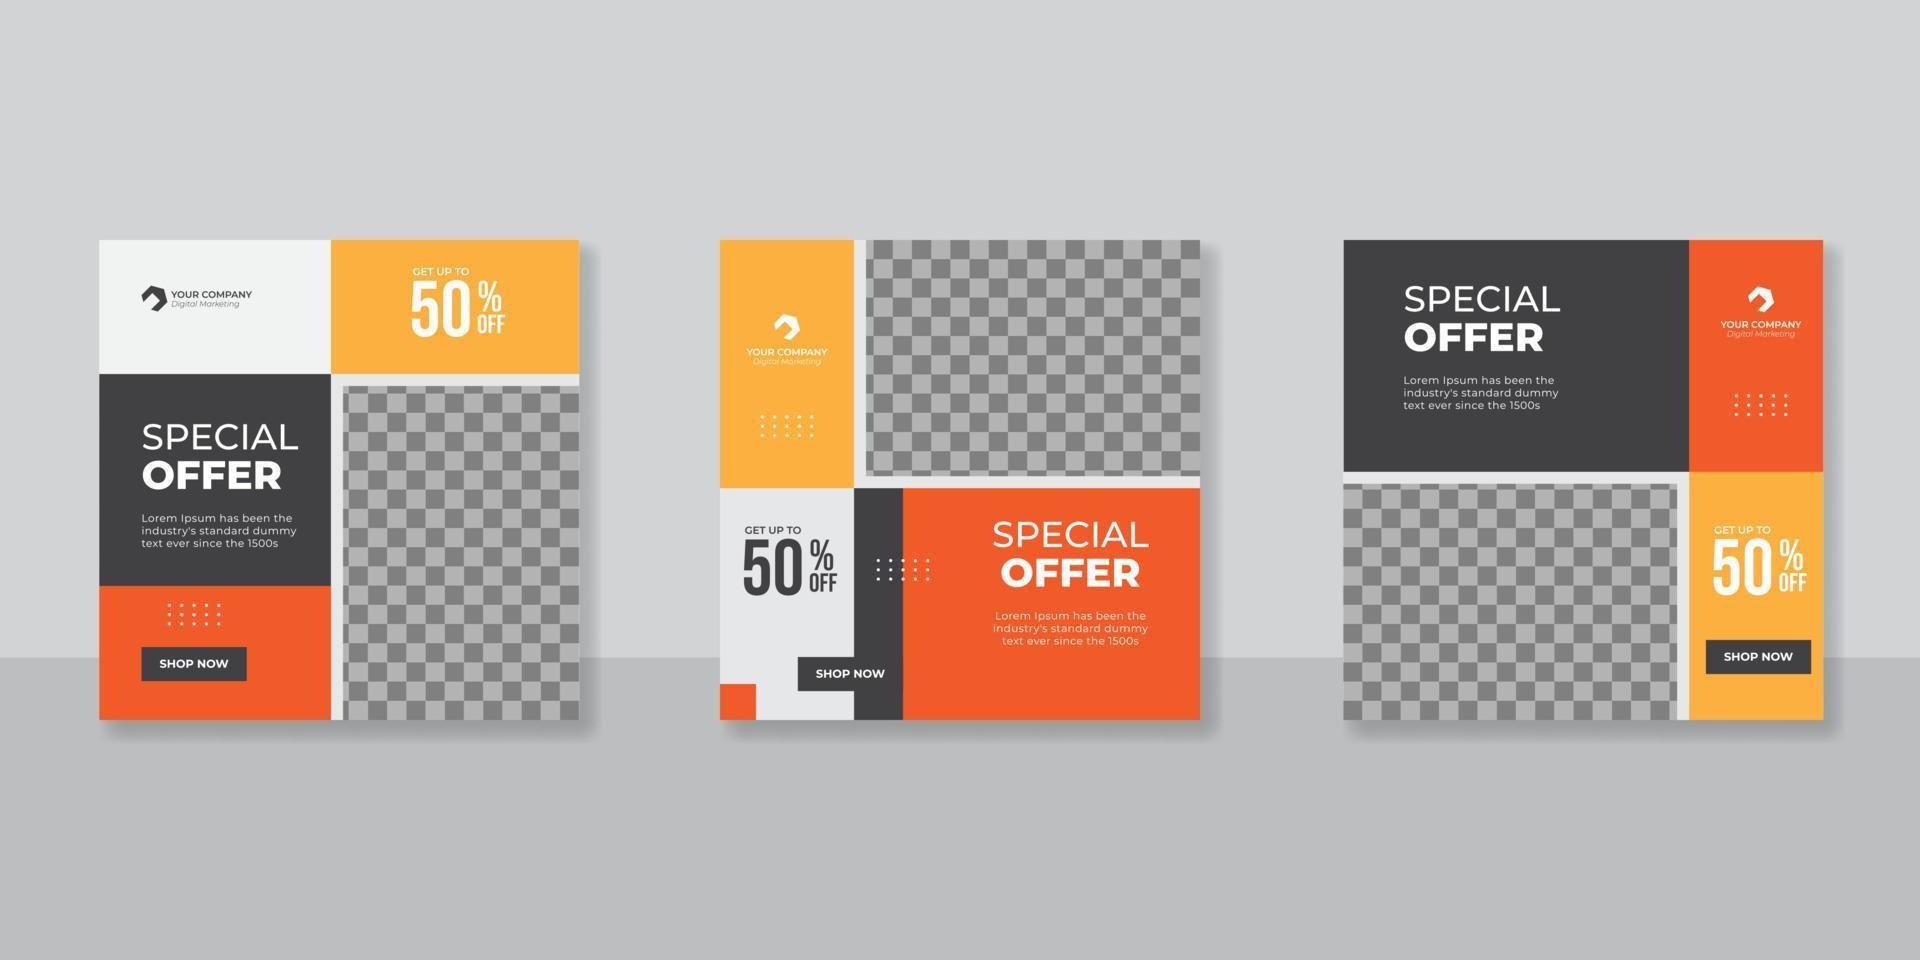 Minimalist promotion square web banner for social media furniture or fashion sale vector